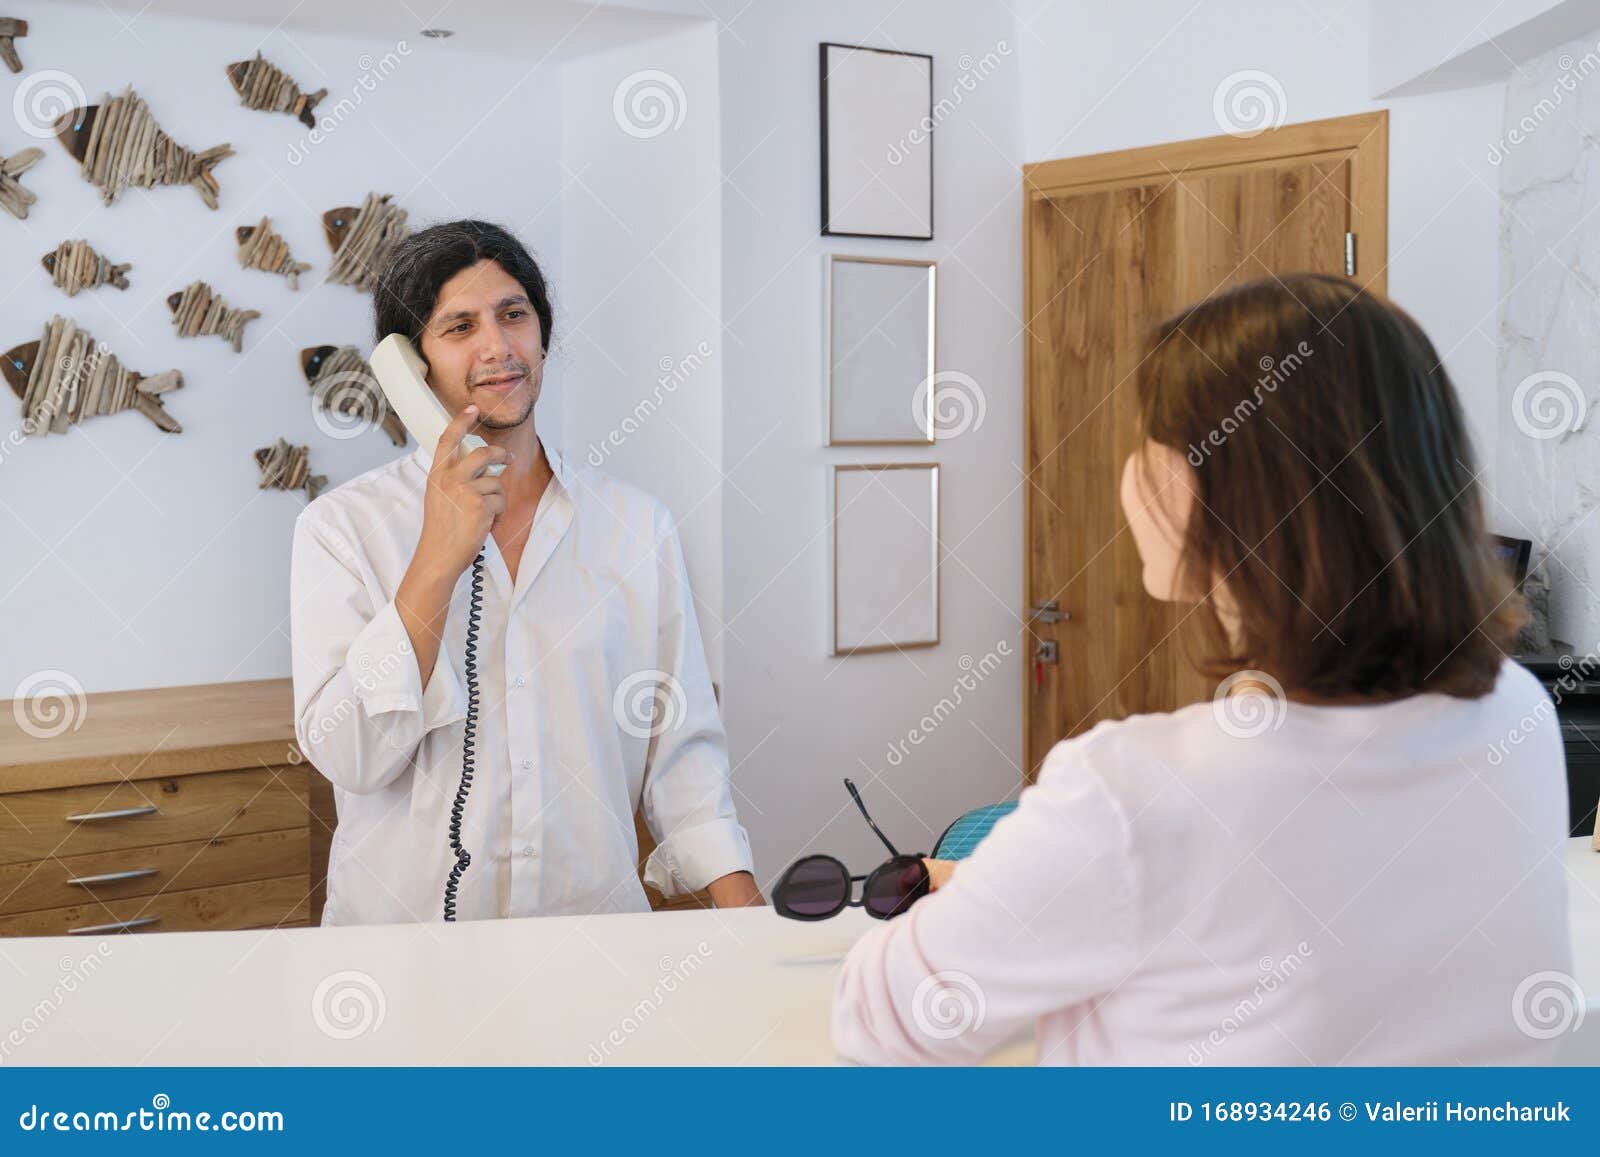 Resort Hotel Front Desk Woman Guest Talking To Man Working At